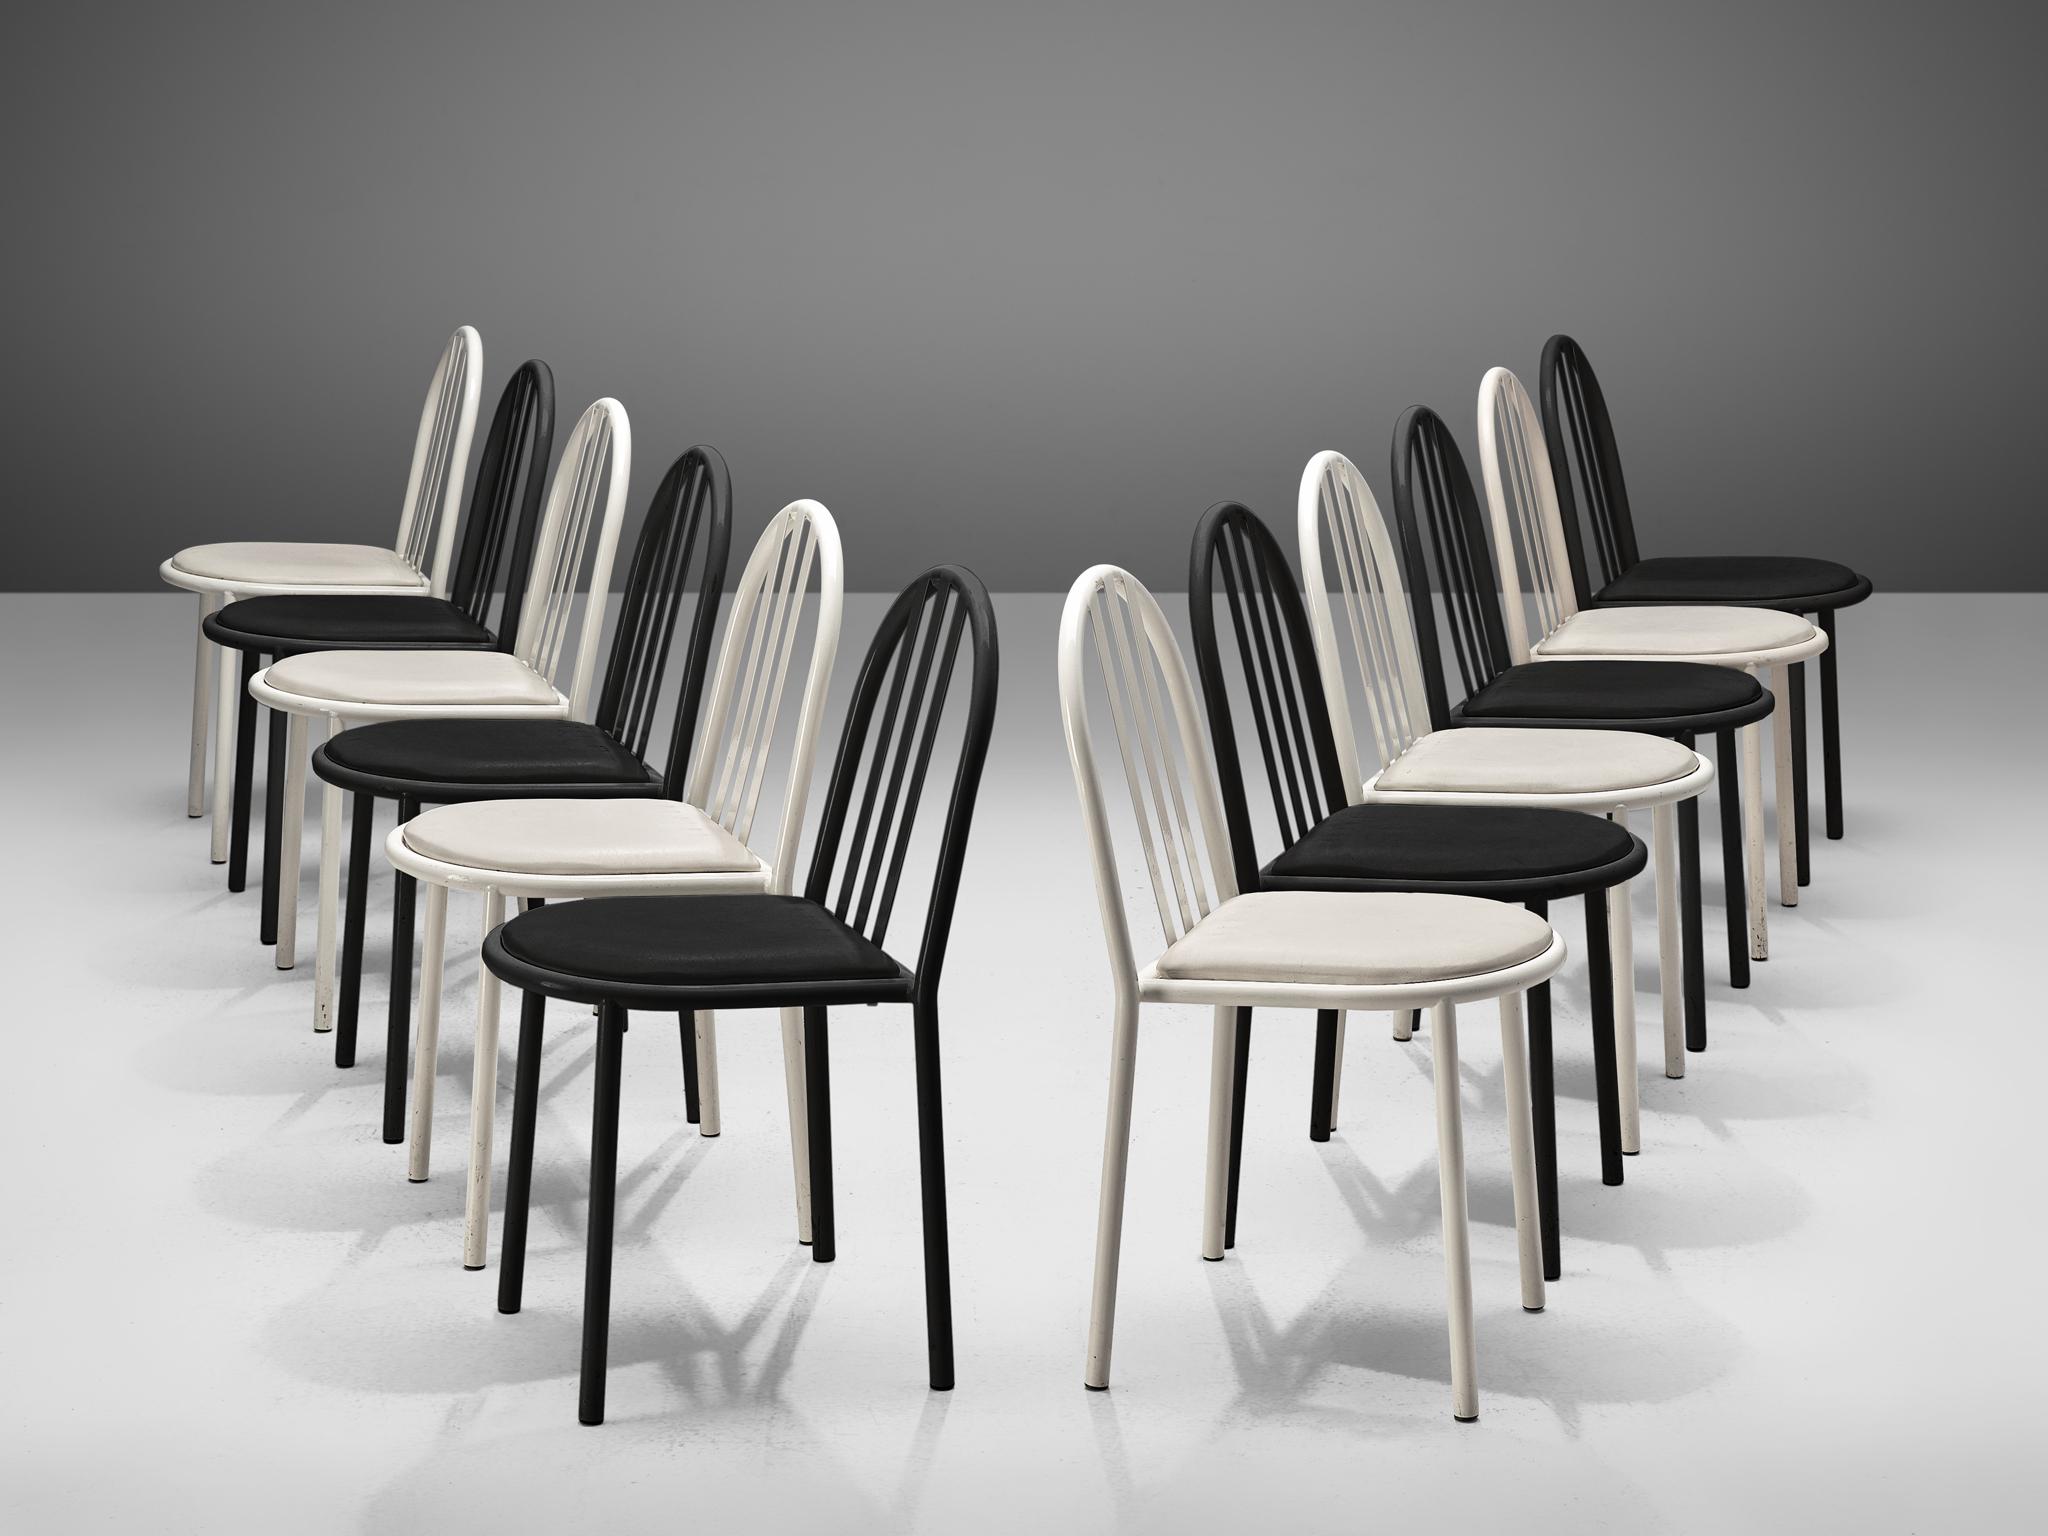 Robert Mallet Stevens for Stevens Designs, large set of dining chairs, lacquered metal and leatherette, France, design 1928, production later.

Large set of white and black lacquered tubular chairs designed by the one of the masters of the Modern